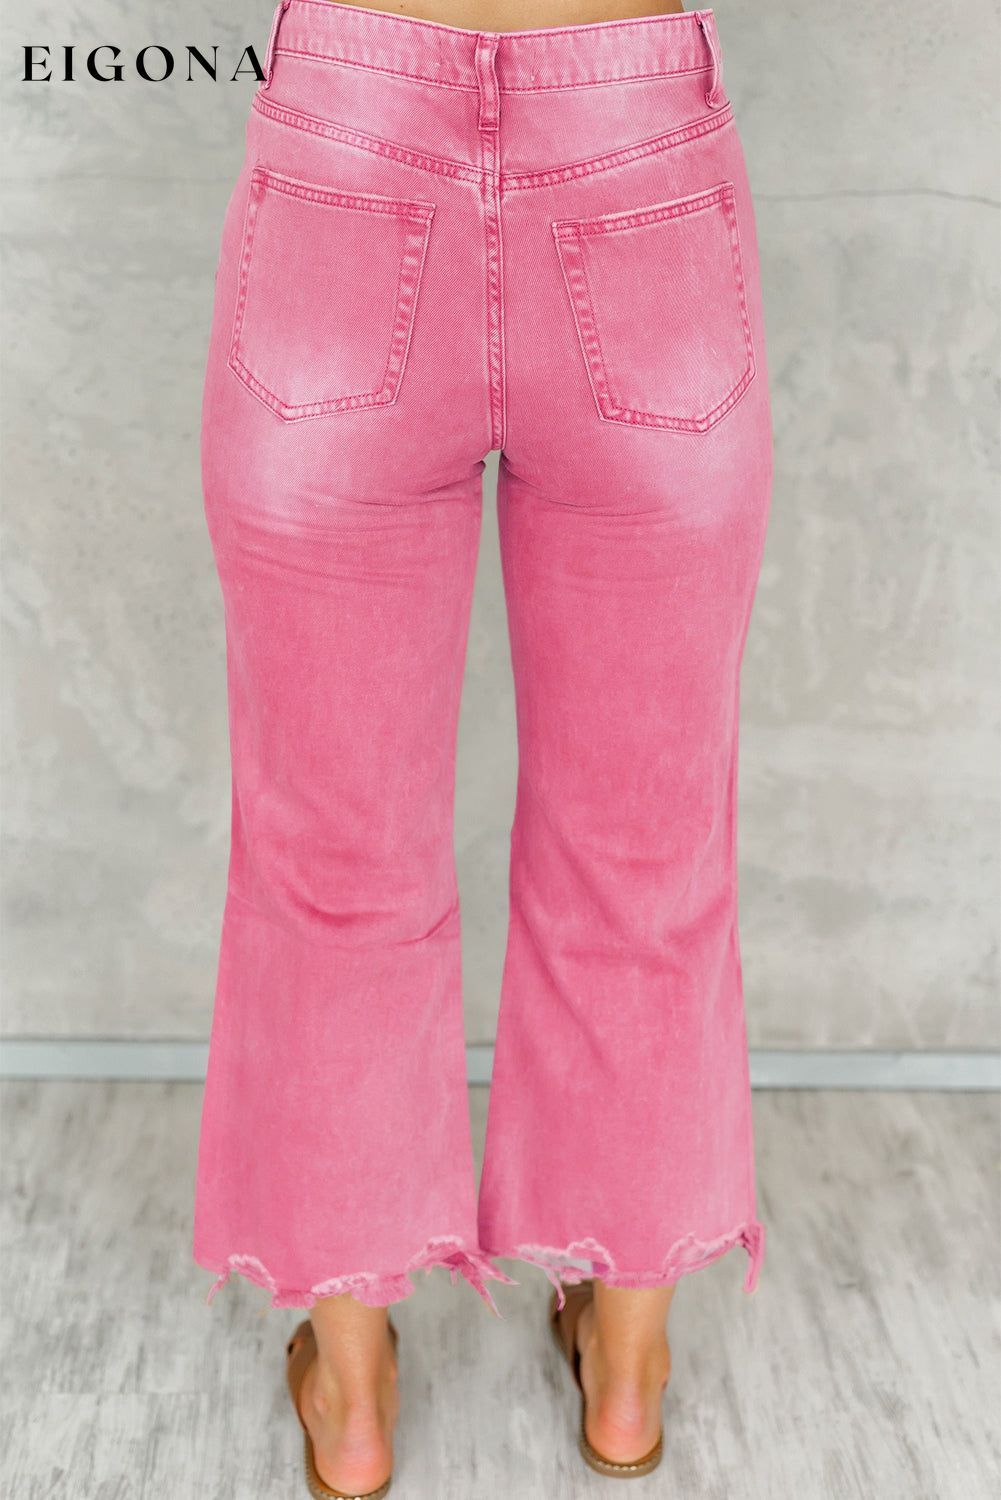 Peach Blossom Distressed Hollow-out High Waist Cropped Flare Jeans All In Stock Best Sellers bottoms clothes Color Pink Craft Distressed Craft Washed EDM Monthly Recomend Fabric Denim Jeans Occasion Daily Print Solid Color Season Spring Silhouette Wide Leg Style Southern Belle Women's Bottoms